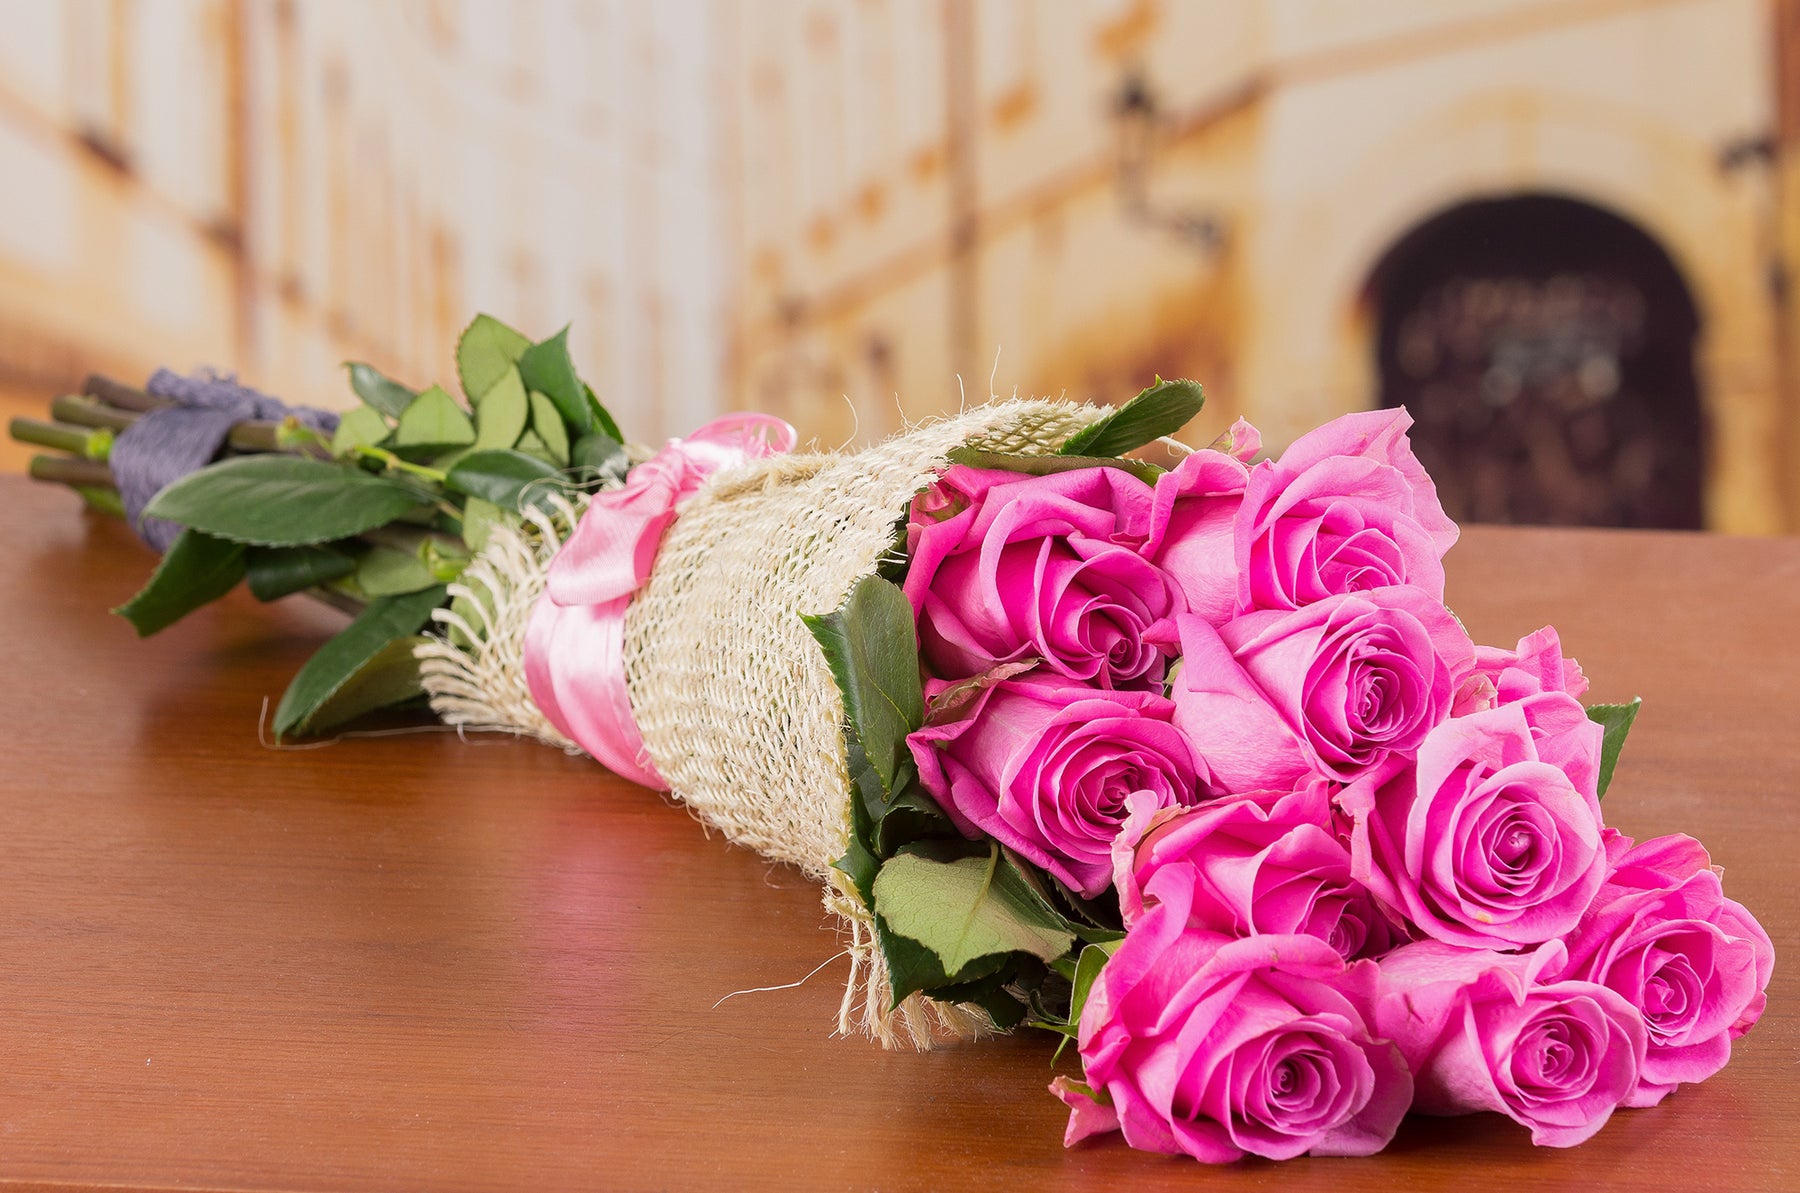 6 Reasons You Should Be Gifting Artificial Flower Arrangements for Valentine's Day